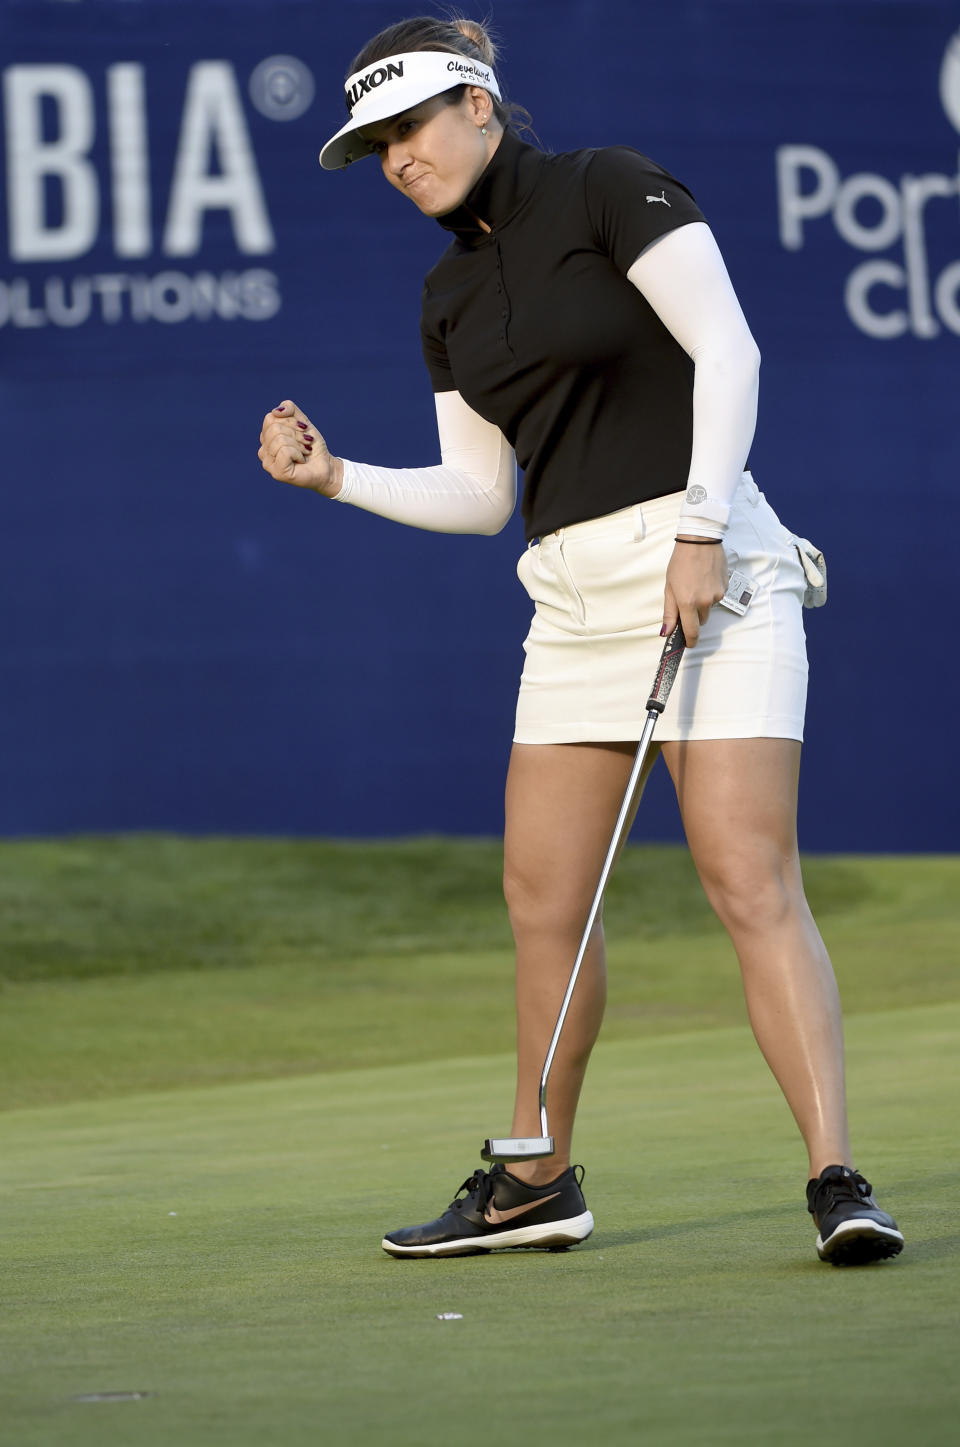 Hannah Green, of Australia, reacts as she sinks a putt on the 18th hole to win the LPGA Cambia Portland Classic golf tournament in Portland, Ore., Sunday, Sept. 1, 2019. (AP Photo/Steve Dykes)